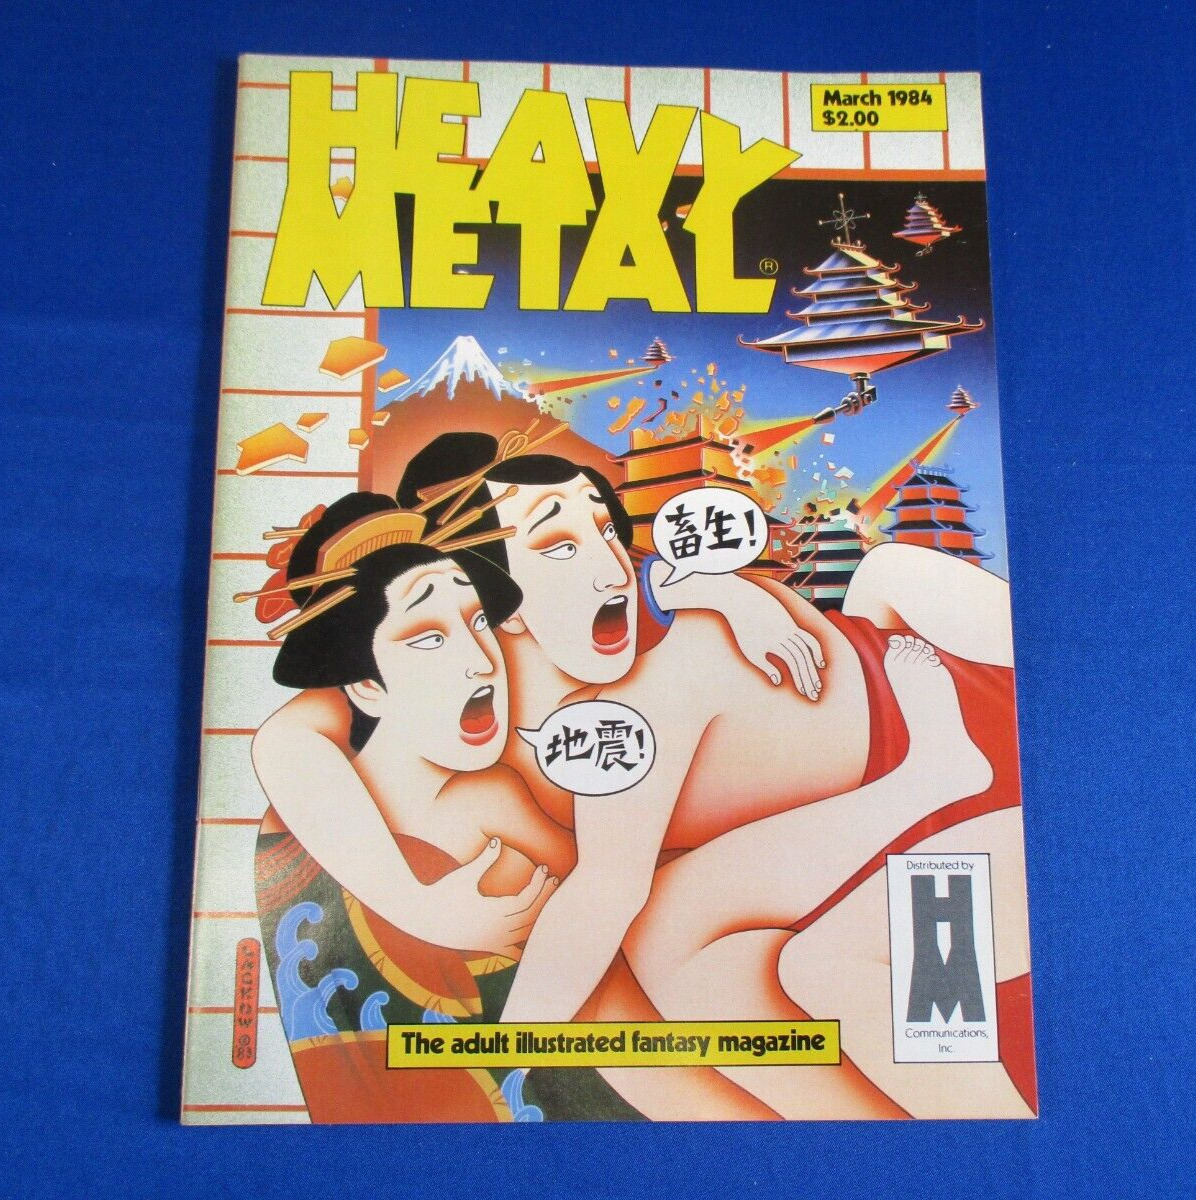 Heavy Metal Magazine March 1984 Andy Lackow Cover Art Very Good Condition